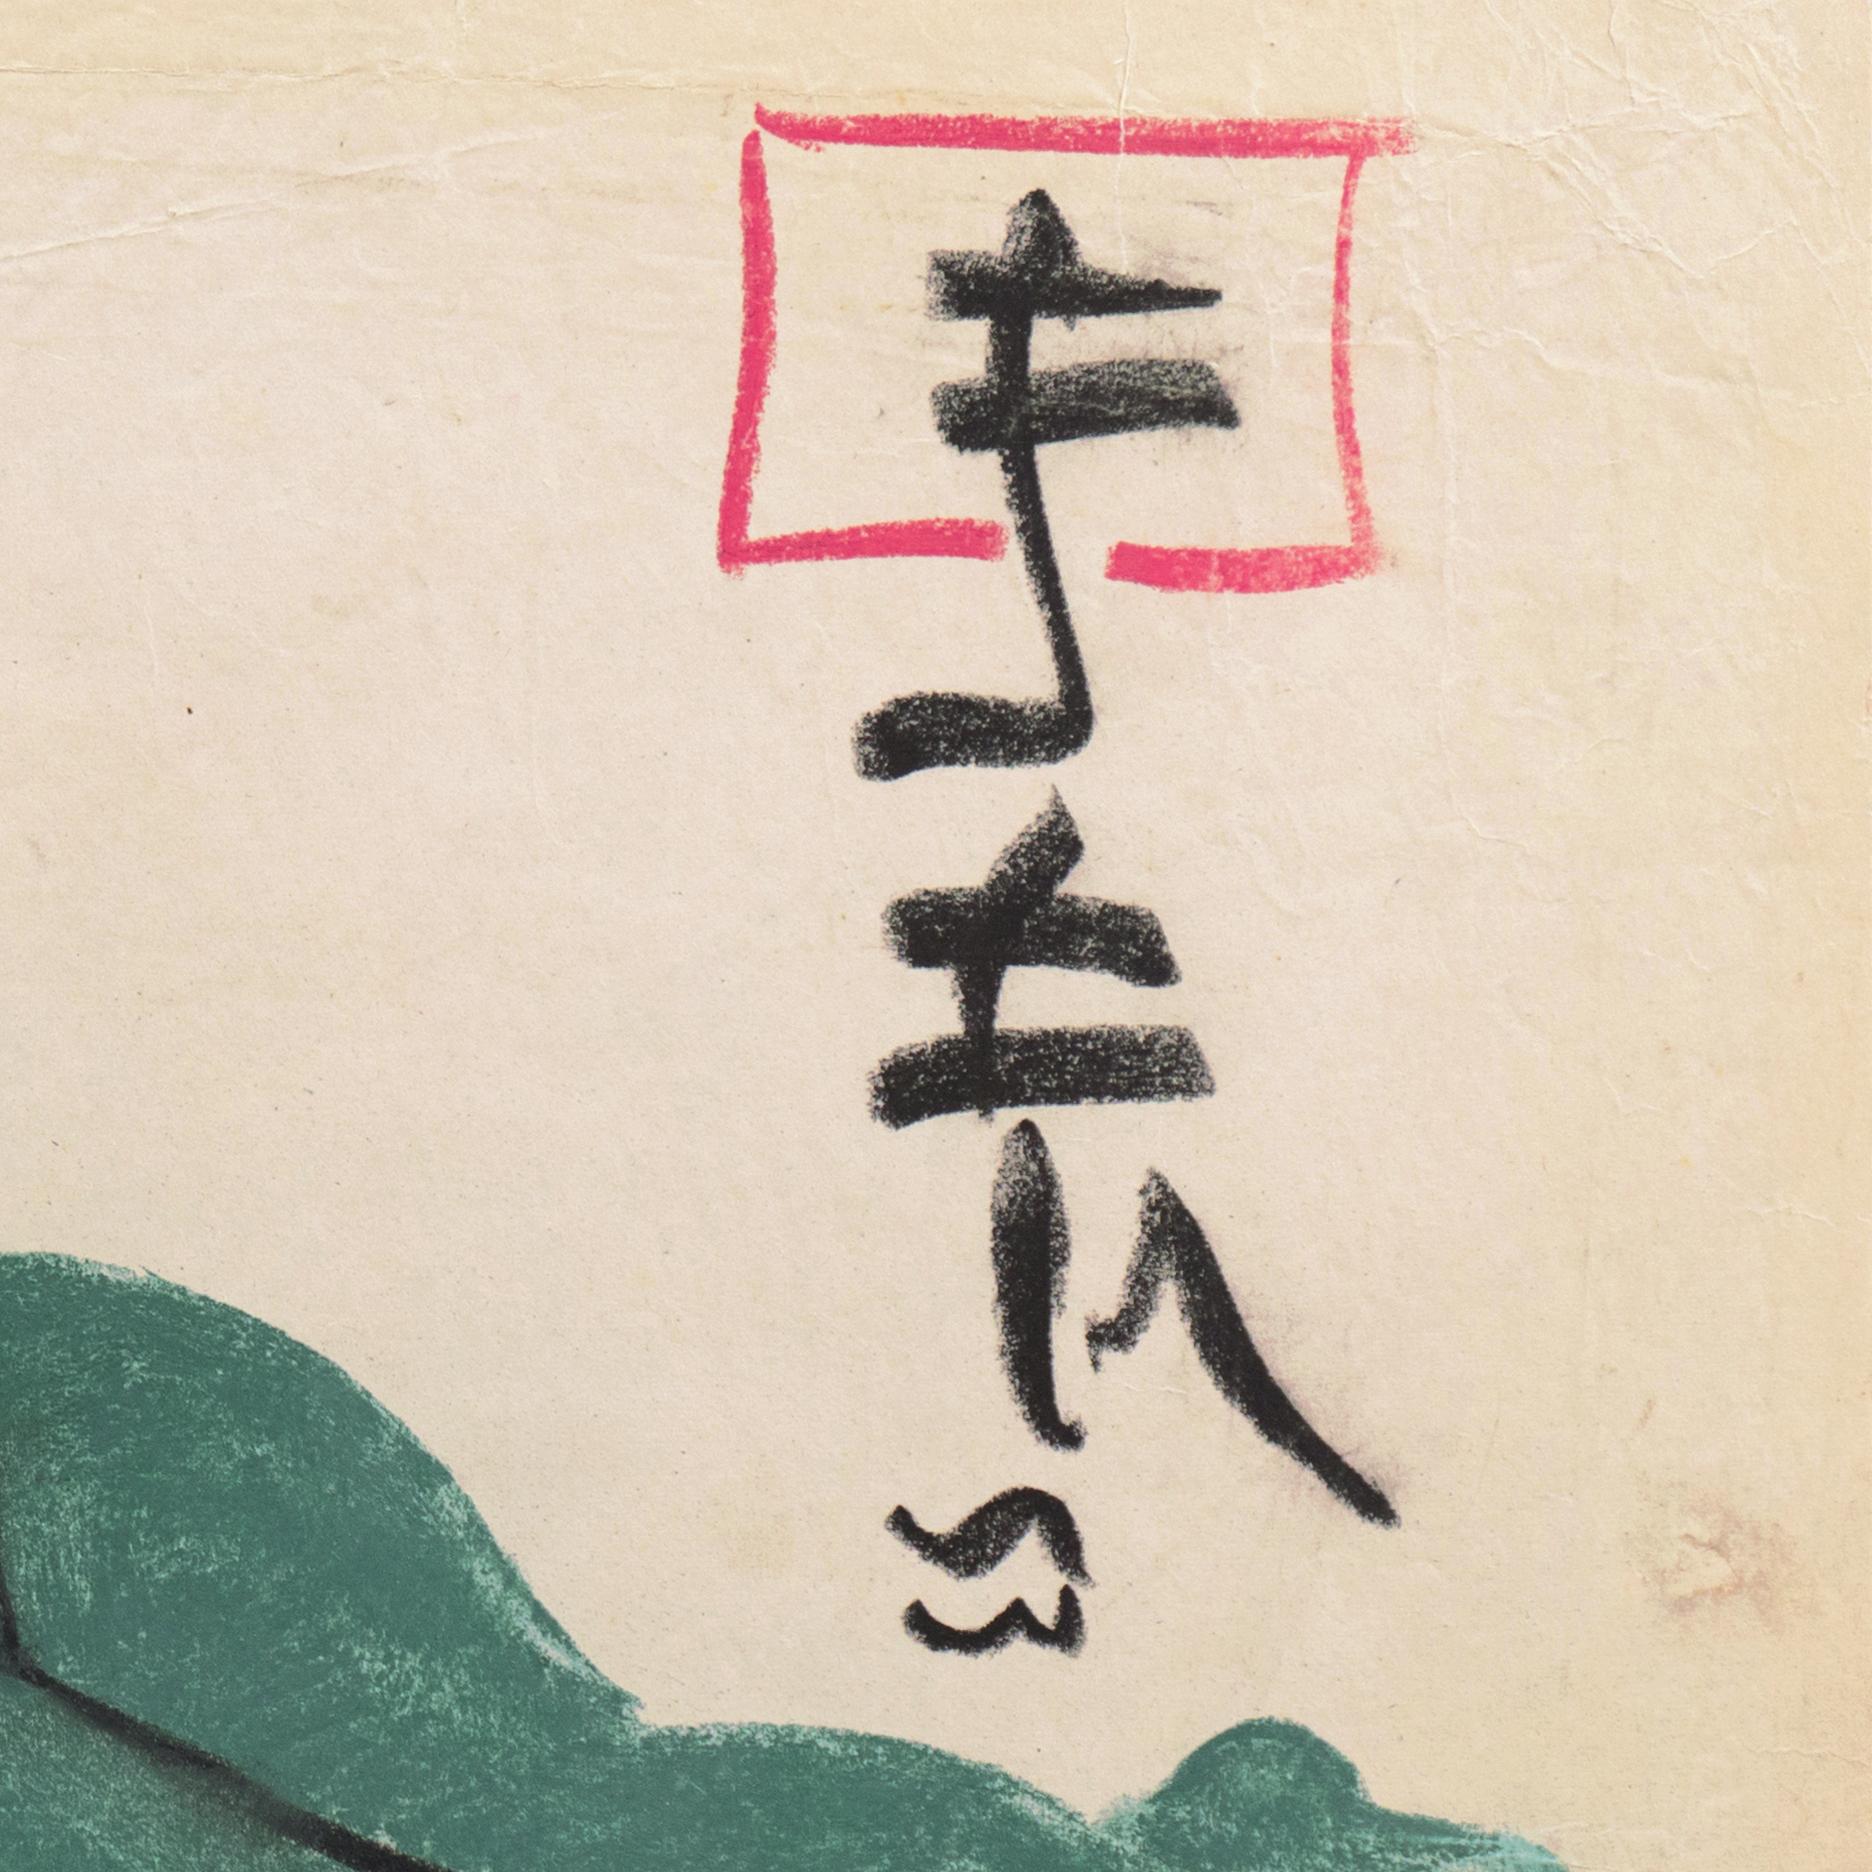 20th Century French School; indistinctly inscribed, upper right, in pseudo-Kanji characters, dated 1953 and inscribed, 'Paris'.

A charming handling of this eternal subject by a painterly but unidentified hand in a style reminiscent of the work of